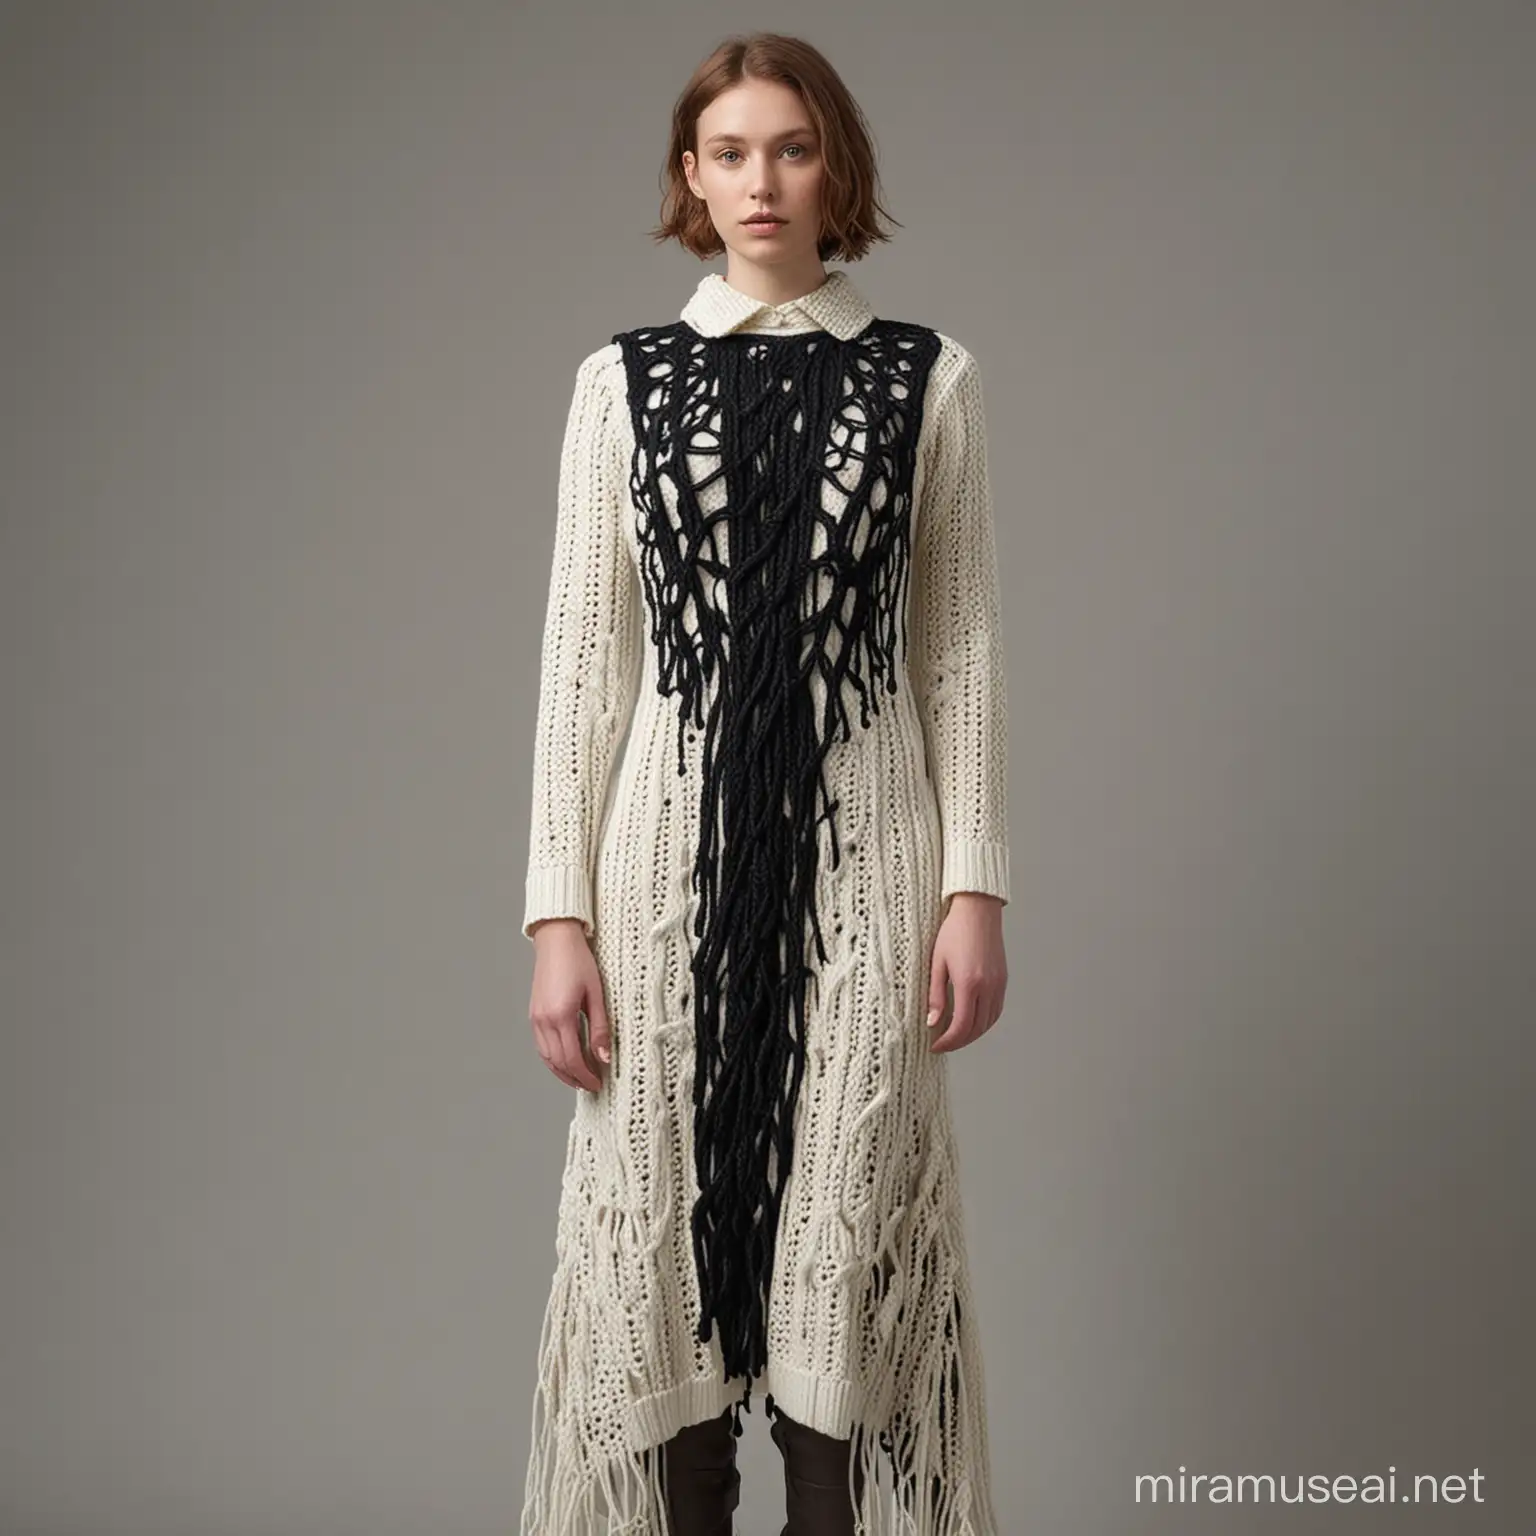 AvantGarde Corded Dress with Repurposed Knits and Yarns